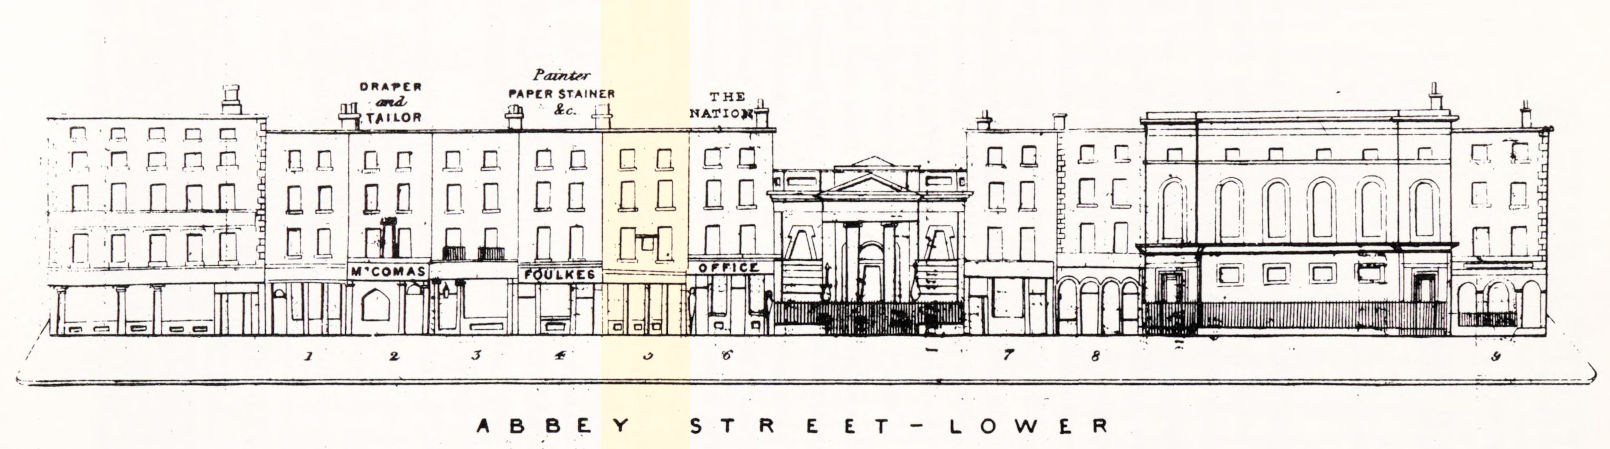 Abbey Street Lower from Shaw's Dublin Pictorial Guide and Directory 1850.